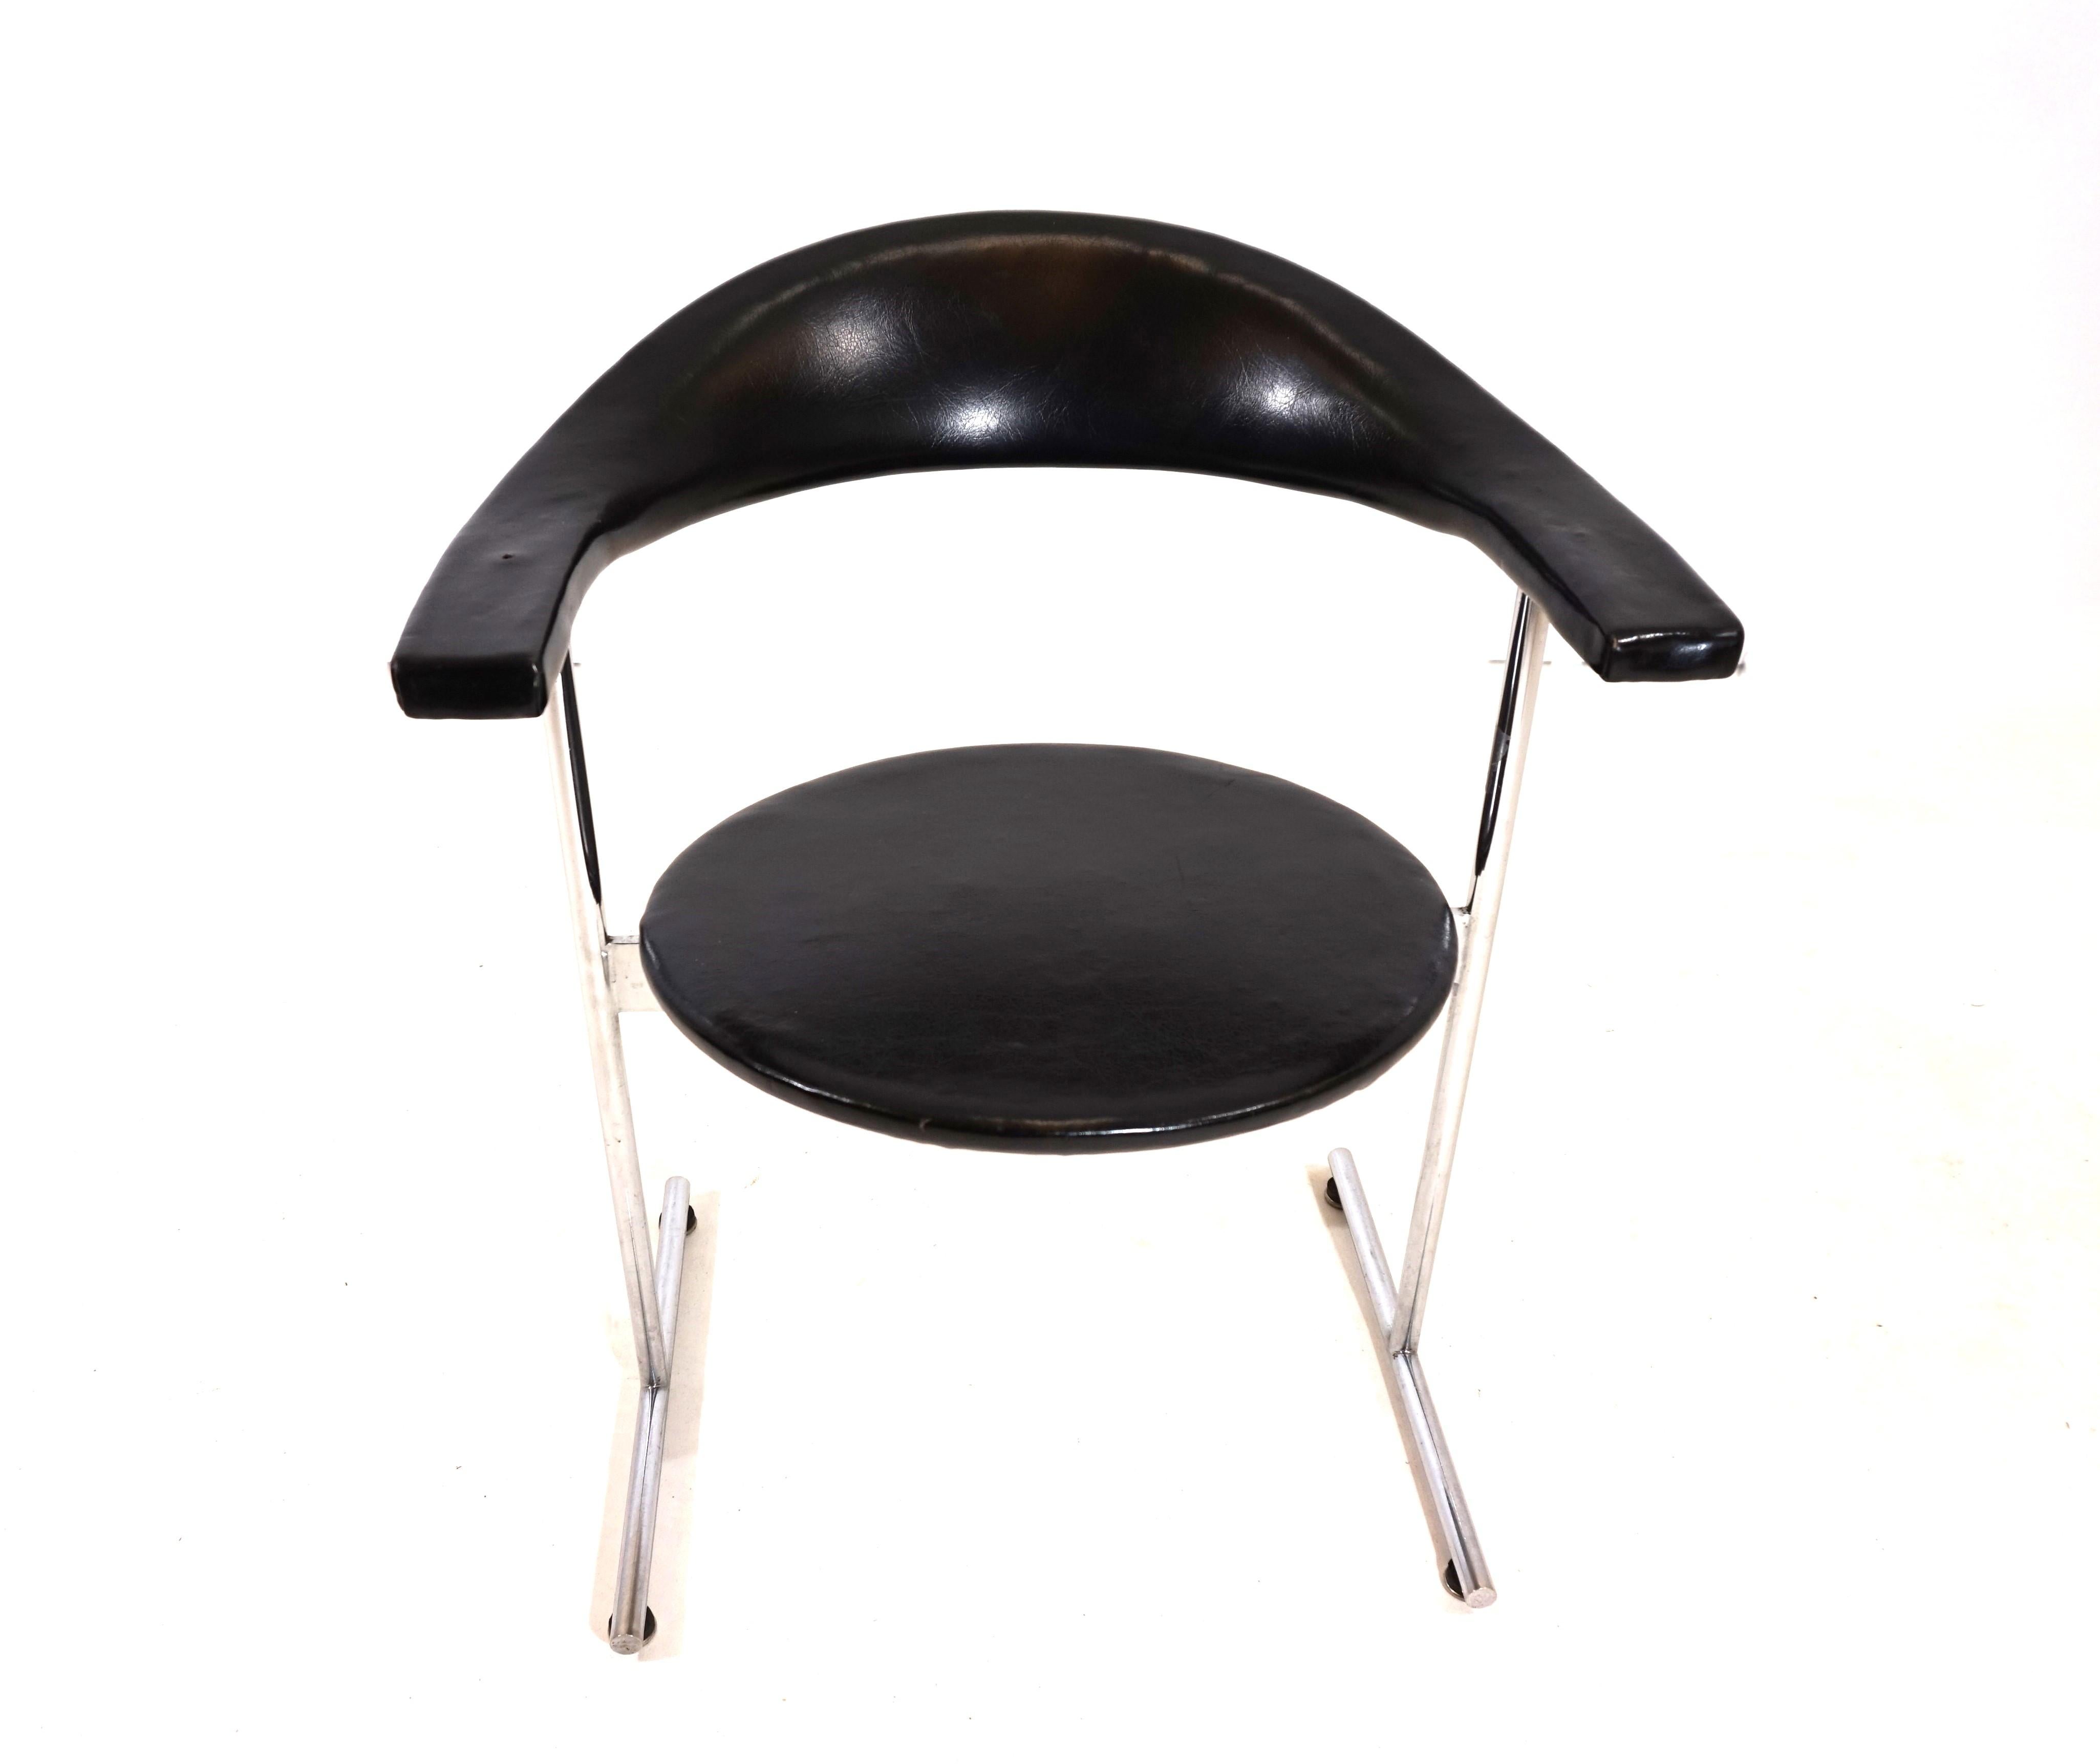 The Airport 037 chair impresses with its unique and absolutely timeless design. This chair is in very good condition. The black original artificial leather is in very good condition with minimal signs of wear. The chrome frame has a patina typical